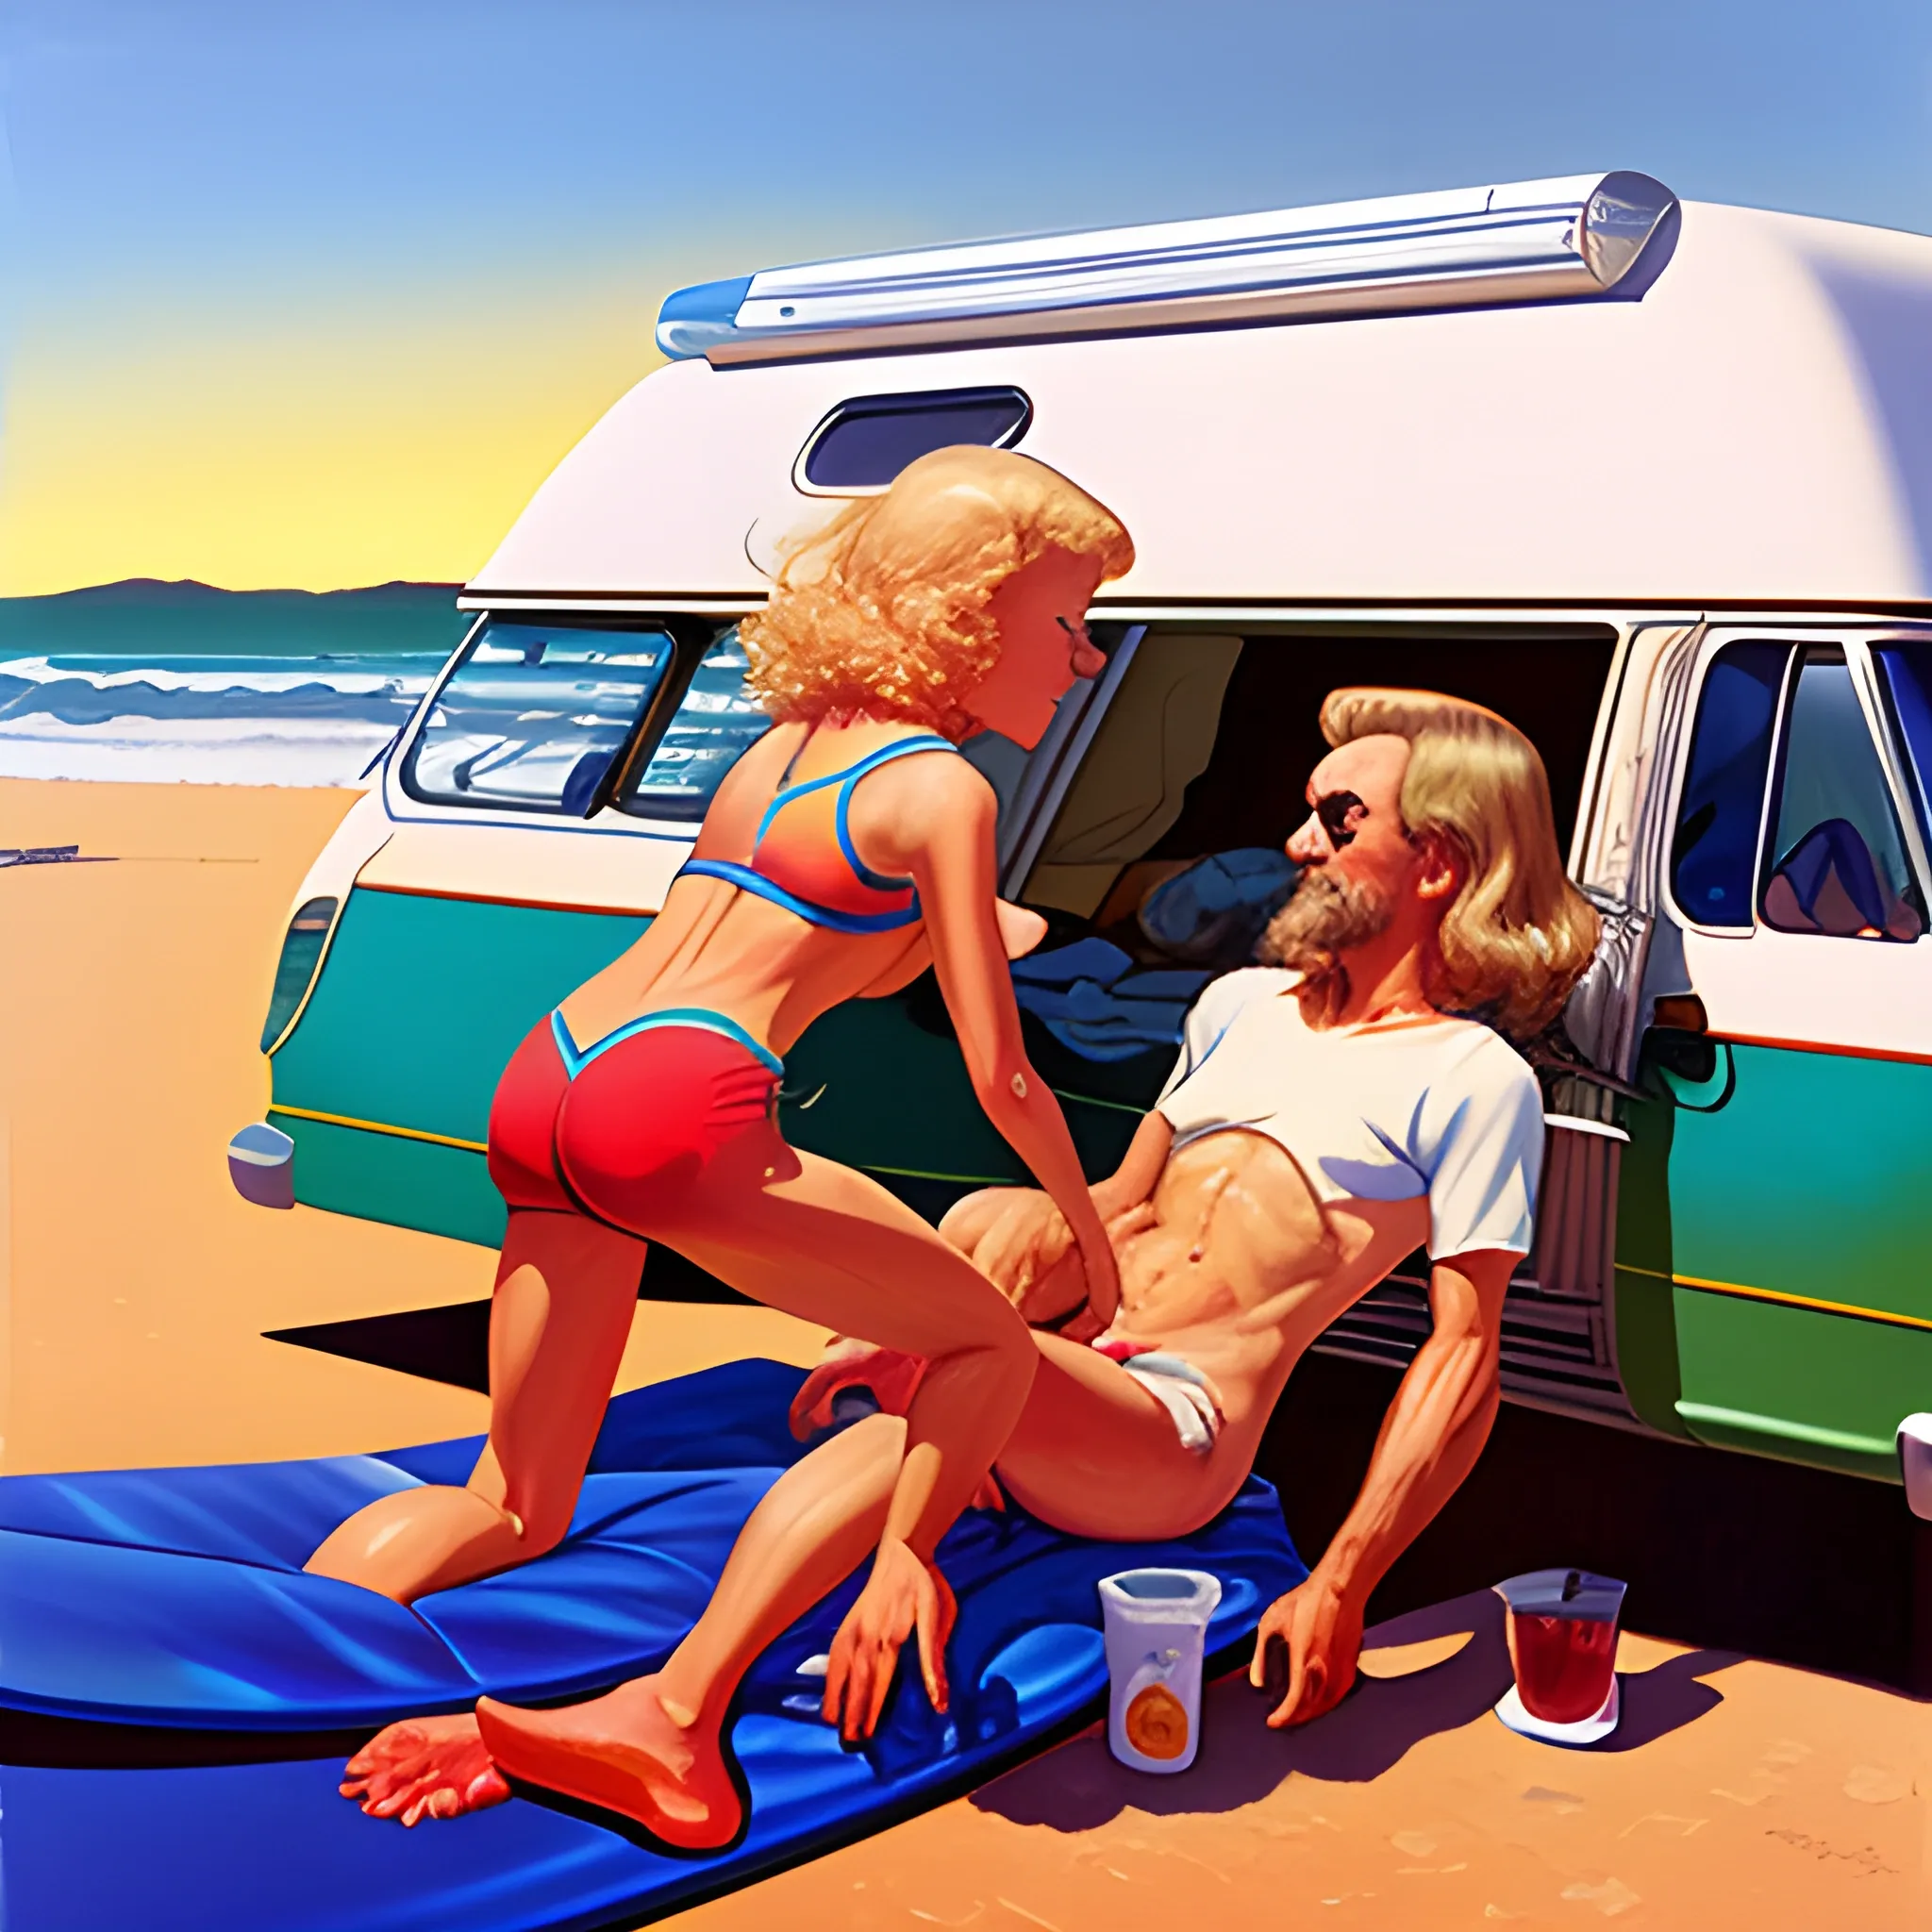  Mel Ramos painting that capture the essence of surfing, camping, van life